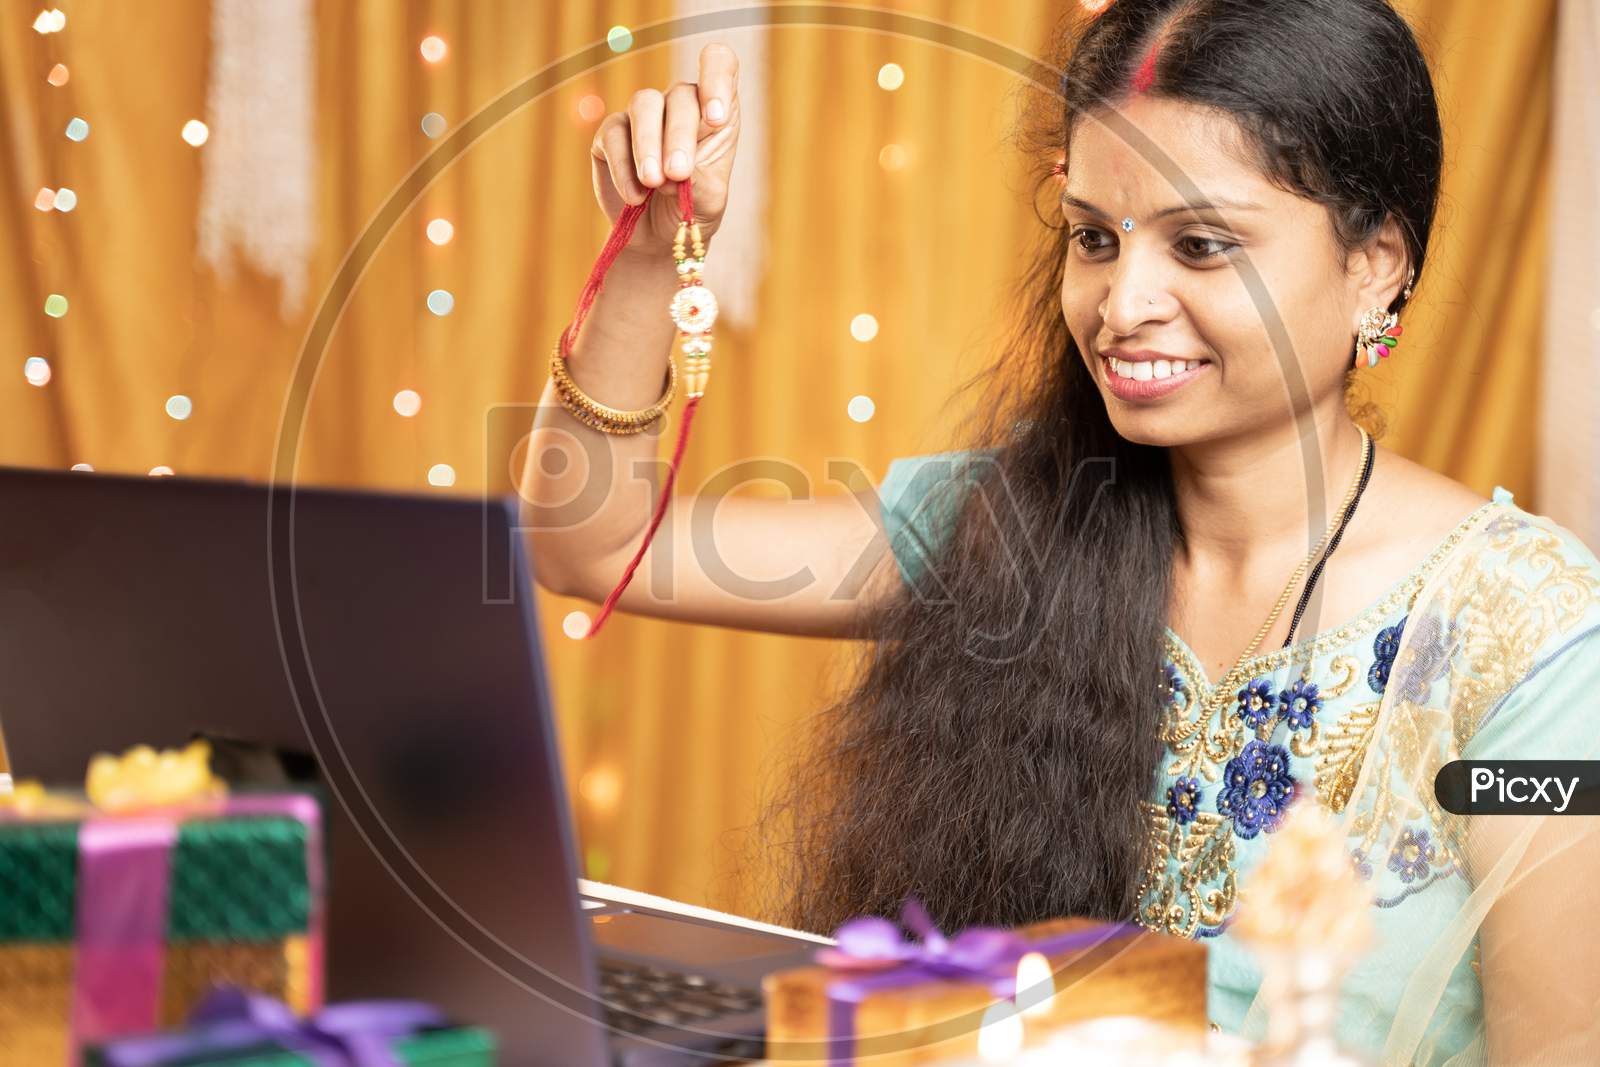 Indian Woman In Tradition Dress On Video Call Or Chat At Raksha Bandhan Festival Telling Her Brother To Tie Rakhi - Concept Of Distance Relations, Festival Celebrations And Technological Lifestyle